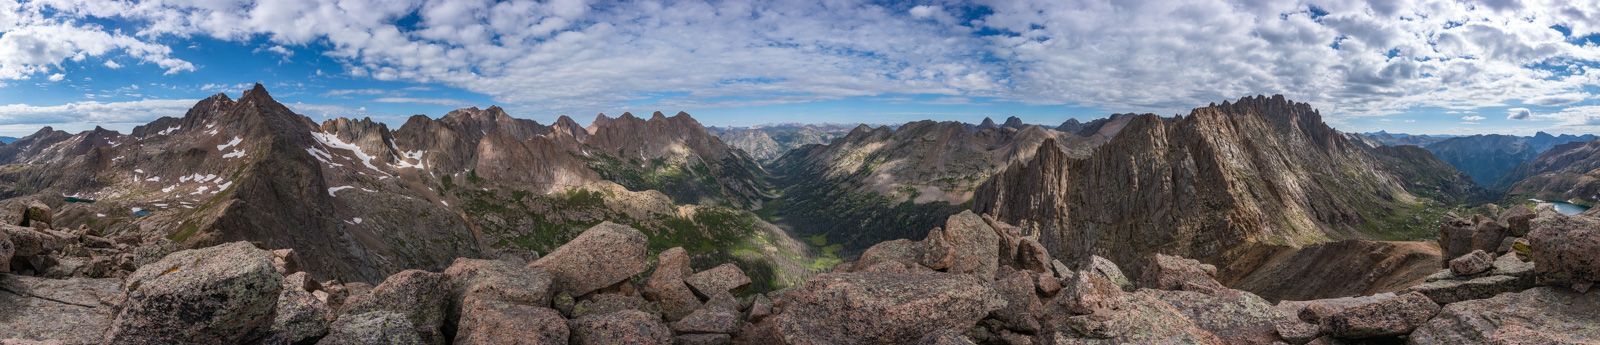 Knife Point summit panorama of Needle Mountains and Grenadiers